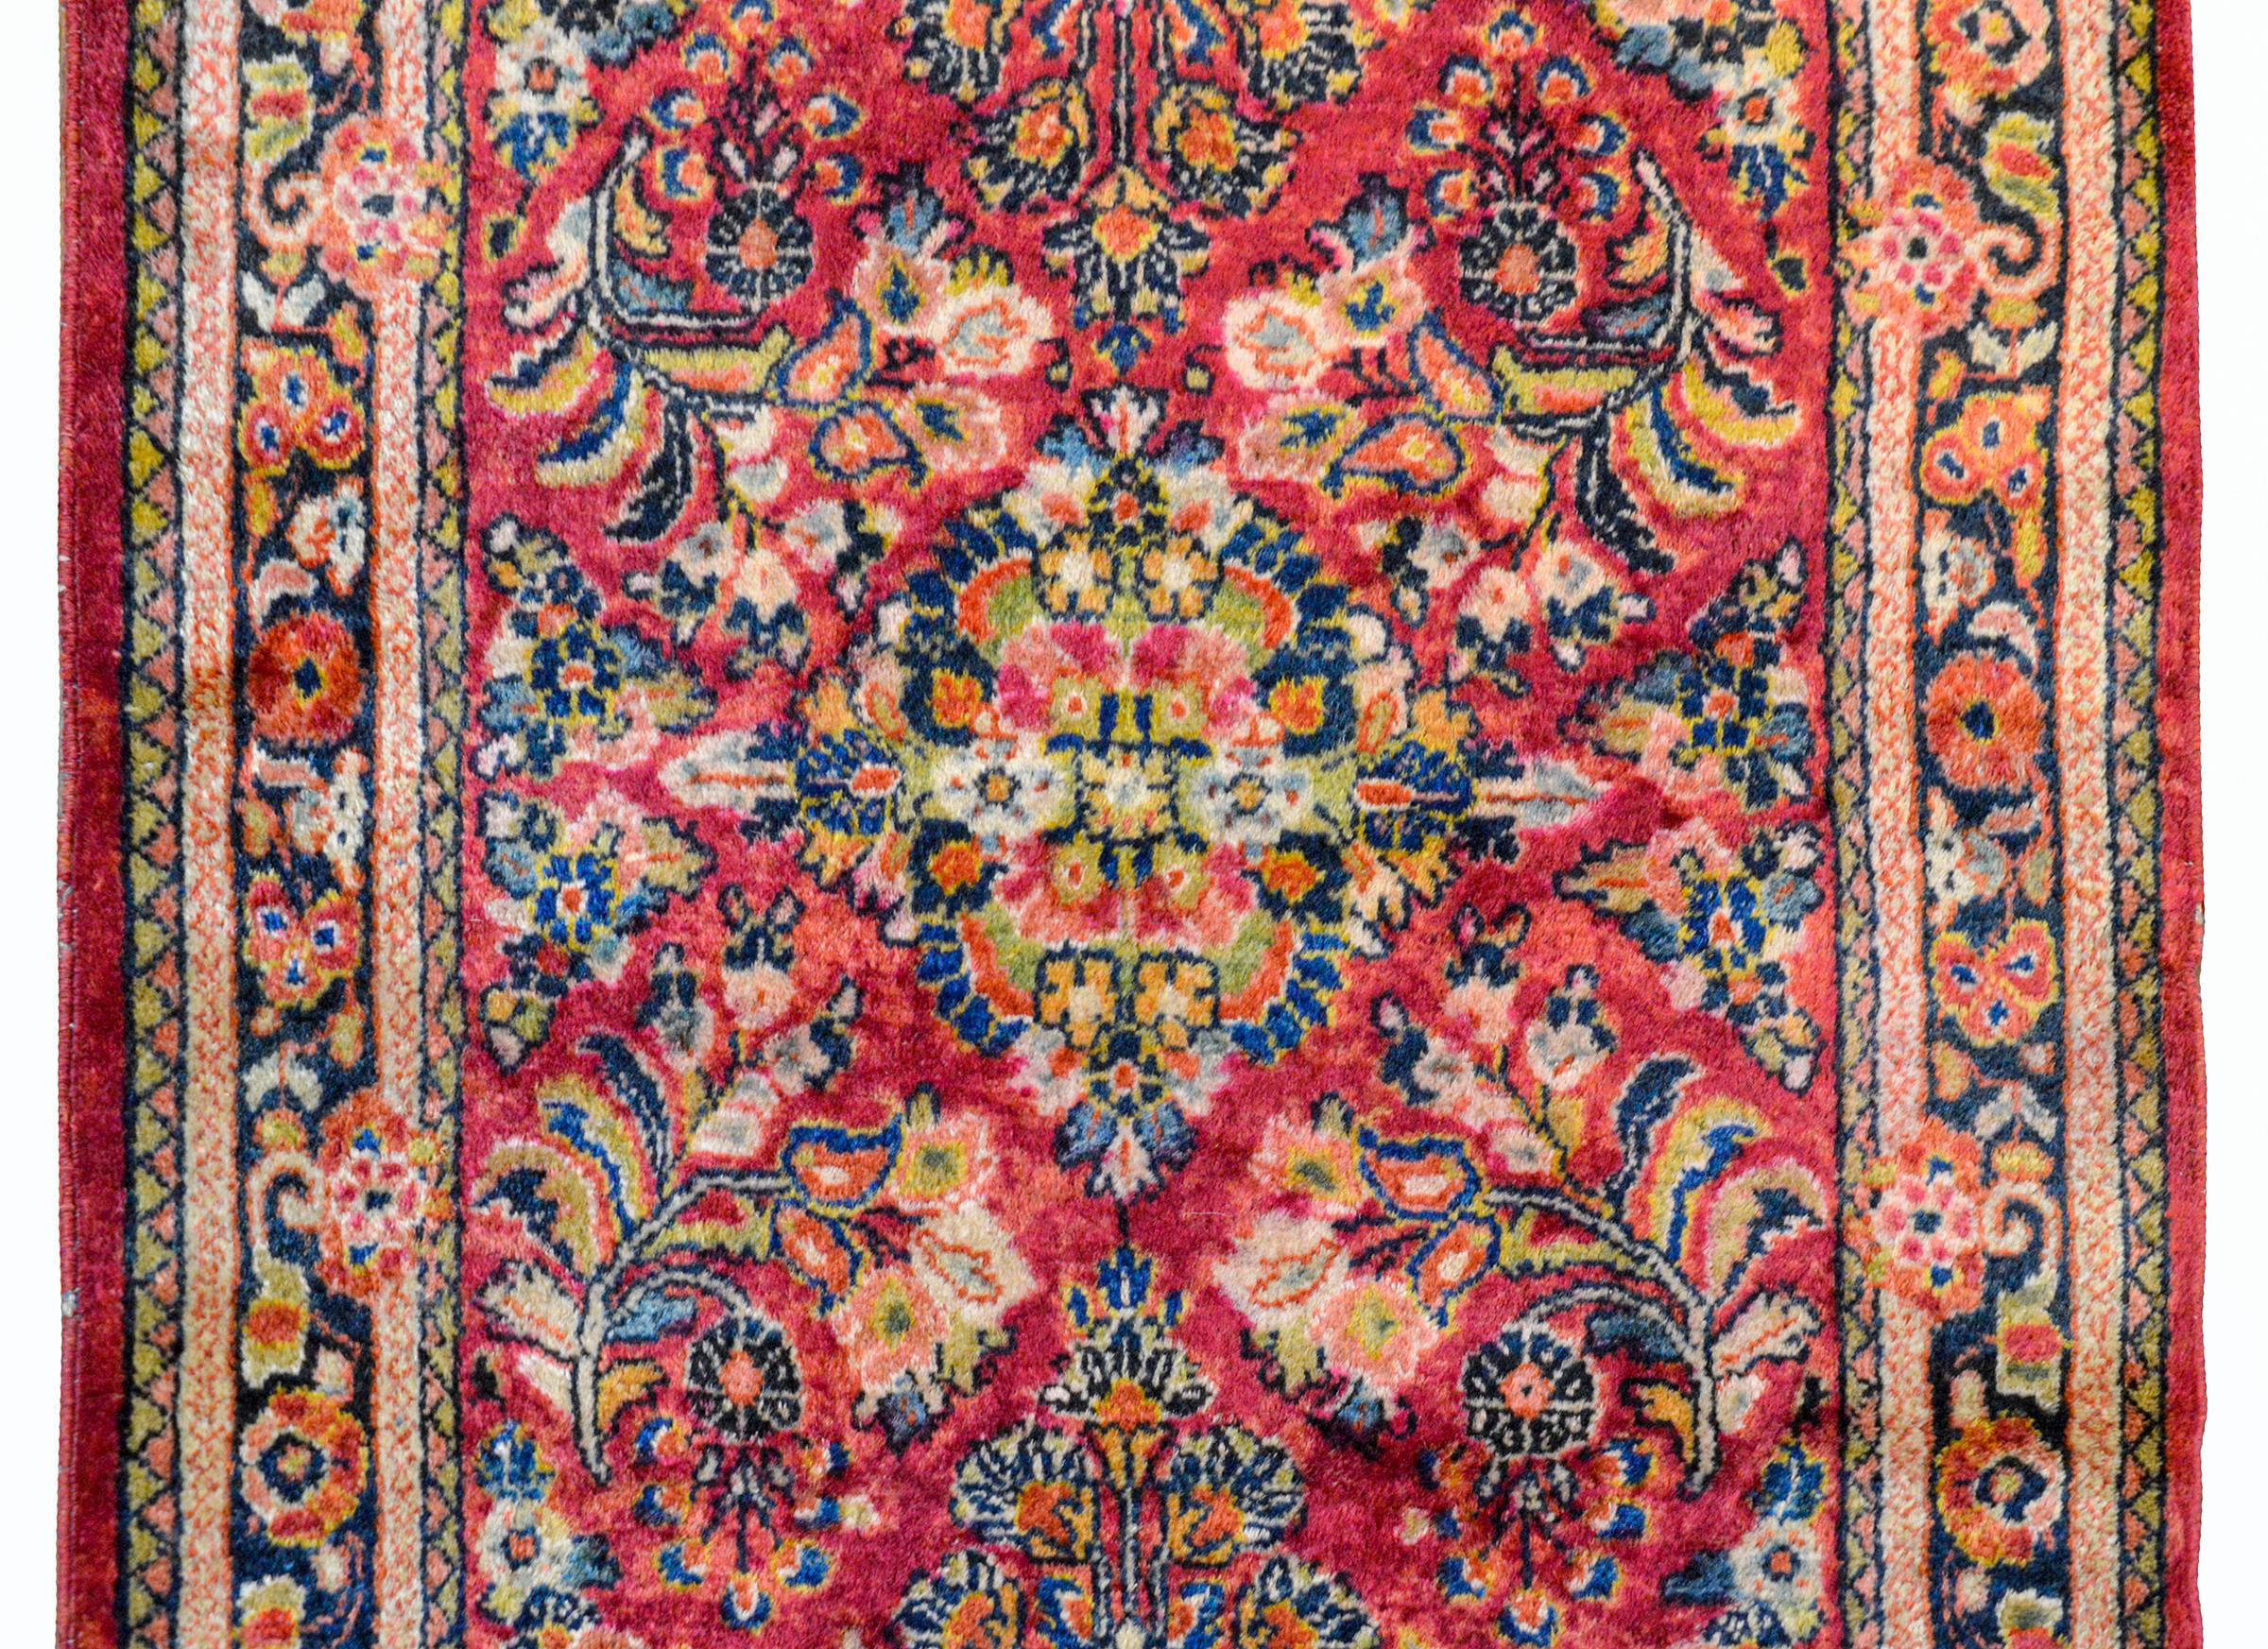 Beautiful early 20th century Persian Sarouk runner with an all-over mirrored floral pattern woven in cranberry, gold, pale green, and light and dark indigo, and surrounded by a simple scrolling vine and floral border.